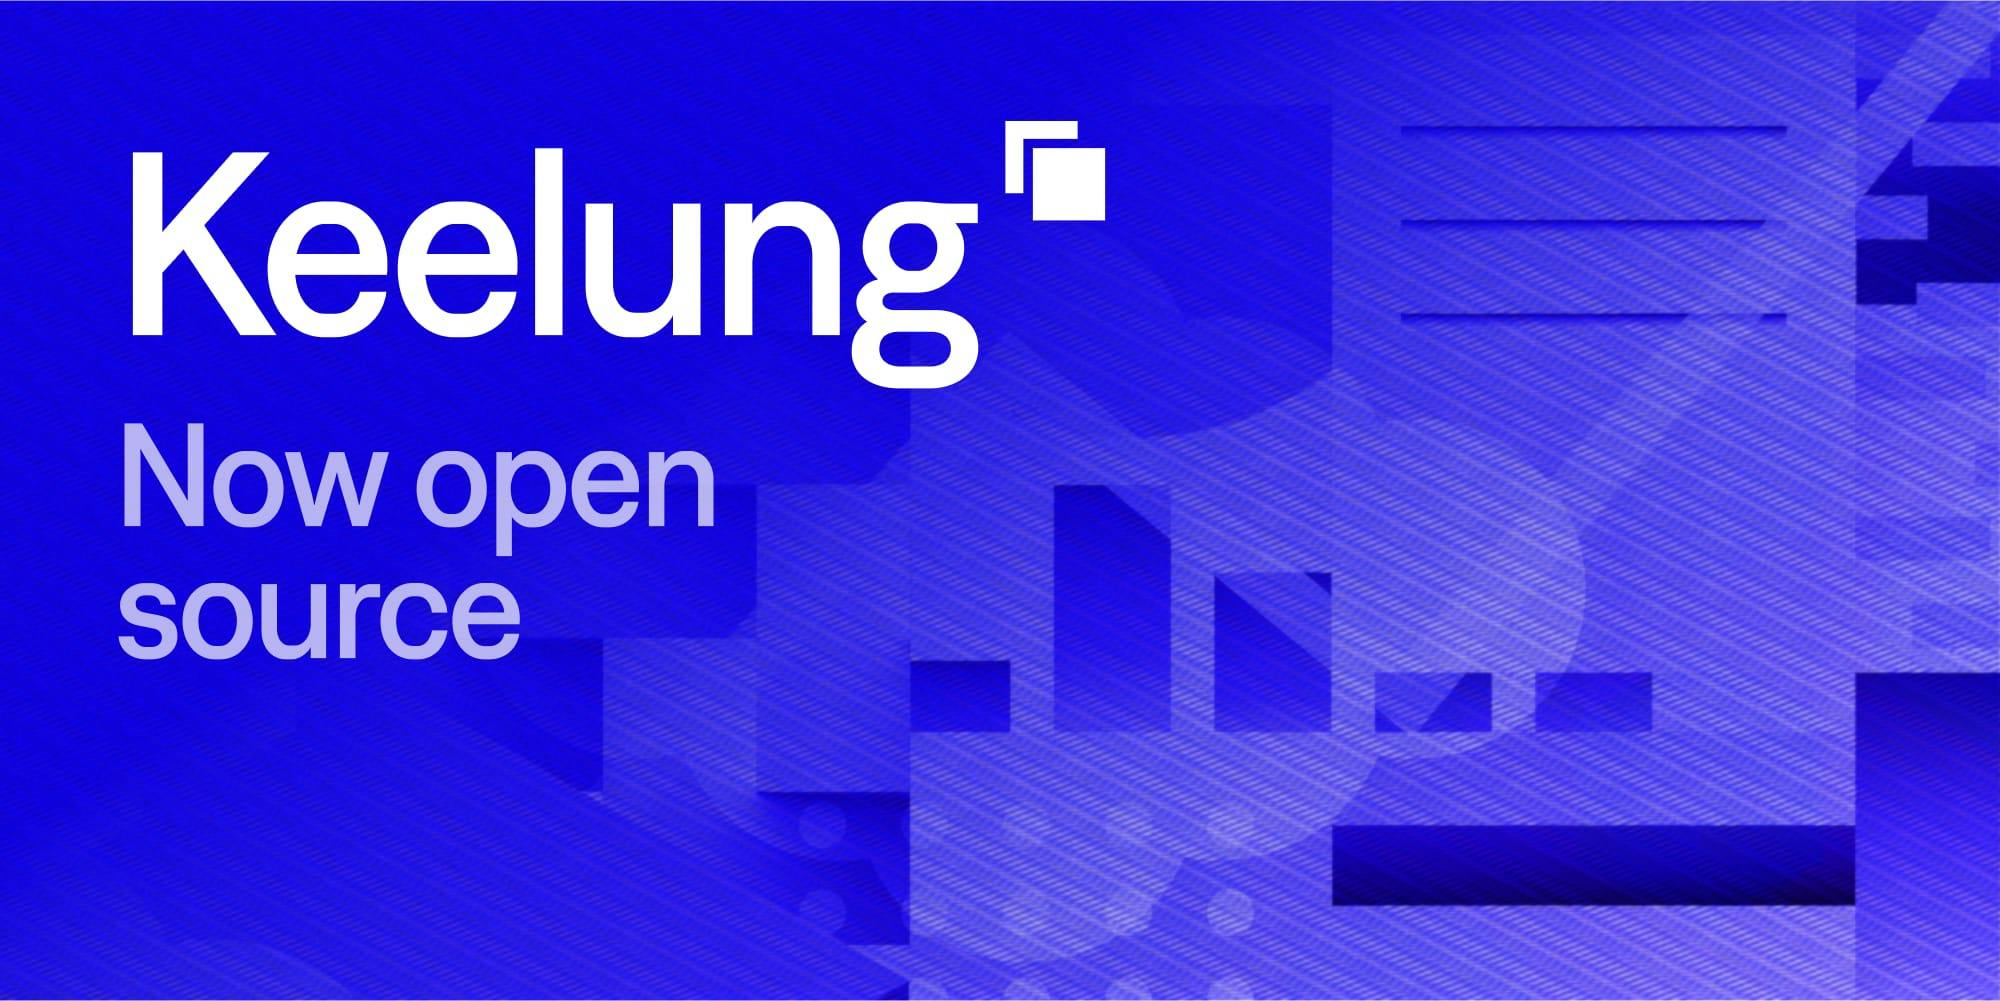 Keelung Compiler is Now Open Source cover